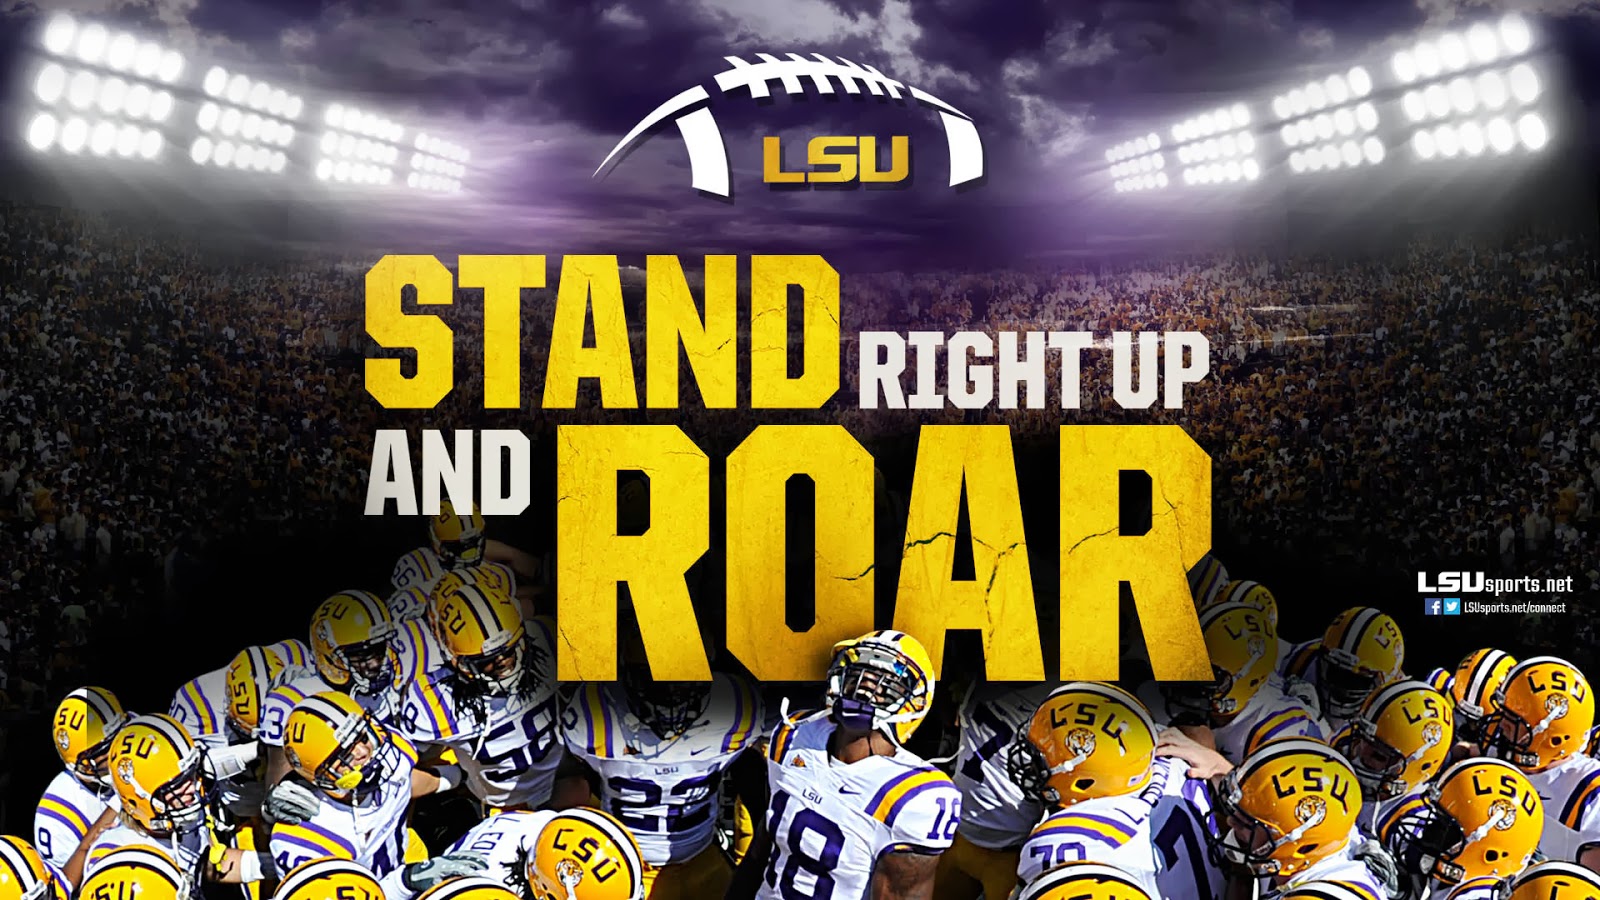 Get Lsu Football Wallpaper And Make This